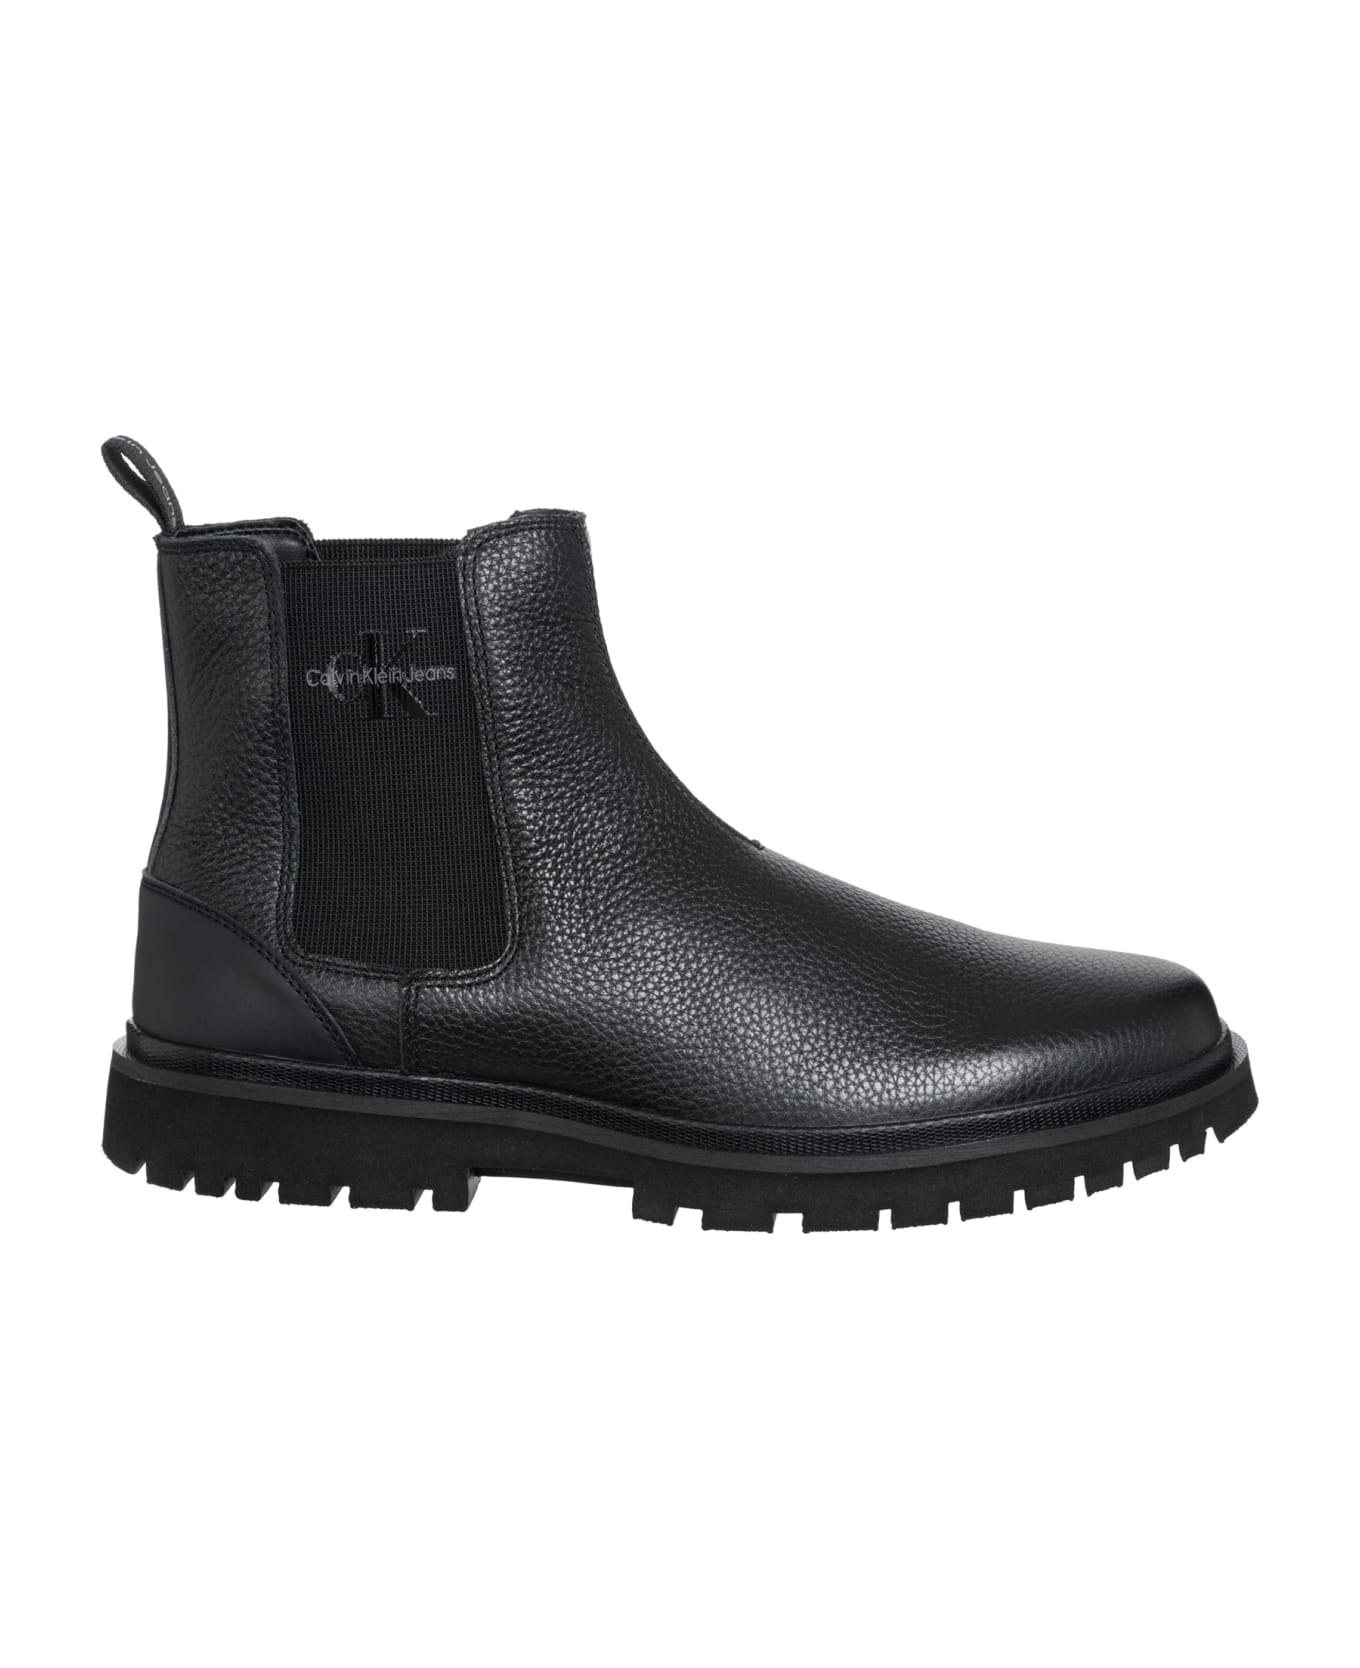 Calvin Klein Leather Ankle Boots - Triple black ブーツ